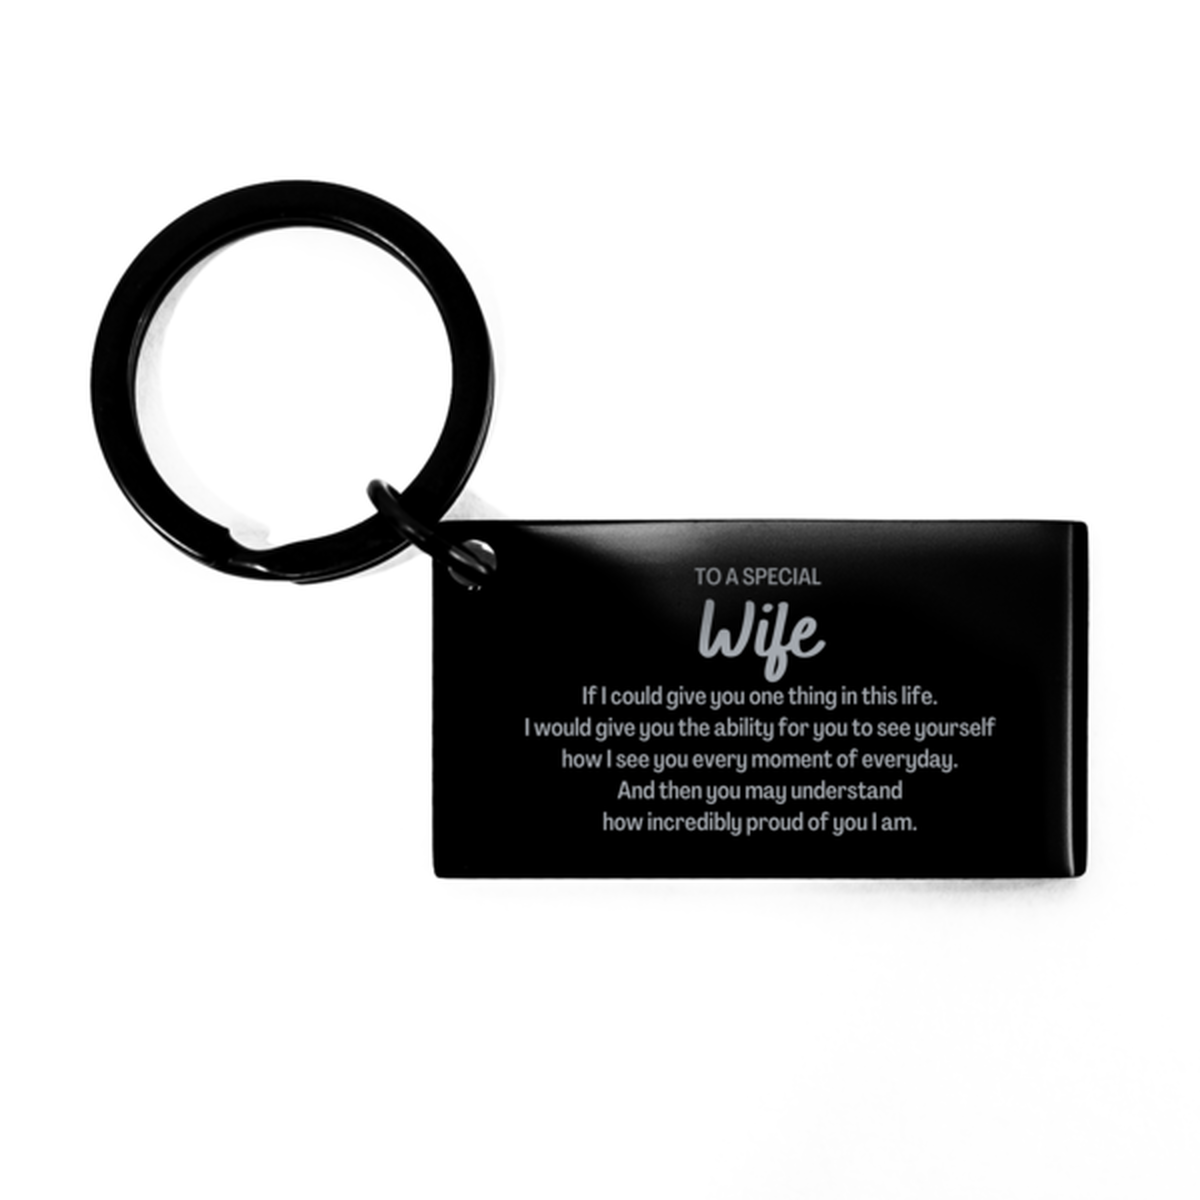 To My Wife Keychain, Gifts For Wife Engraved, Inspirational Gifts for Christmas Birthday, Epic Gifts for Wife To A Special Wife how incredibly proud of you I am